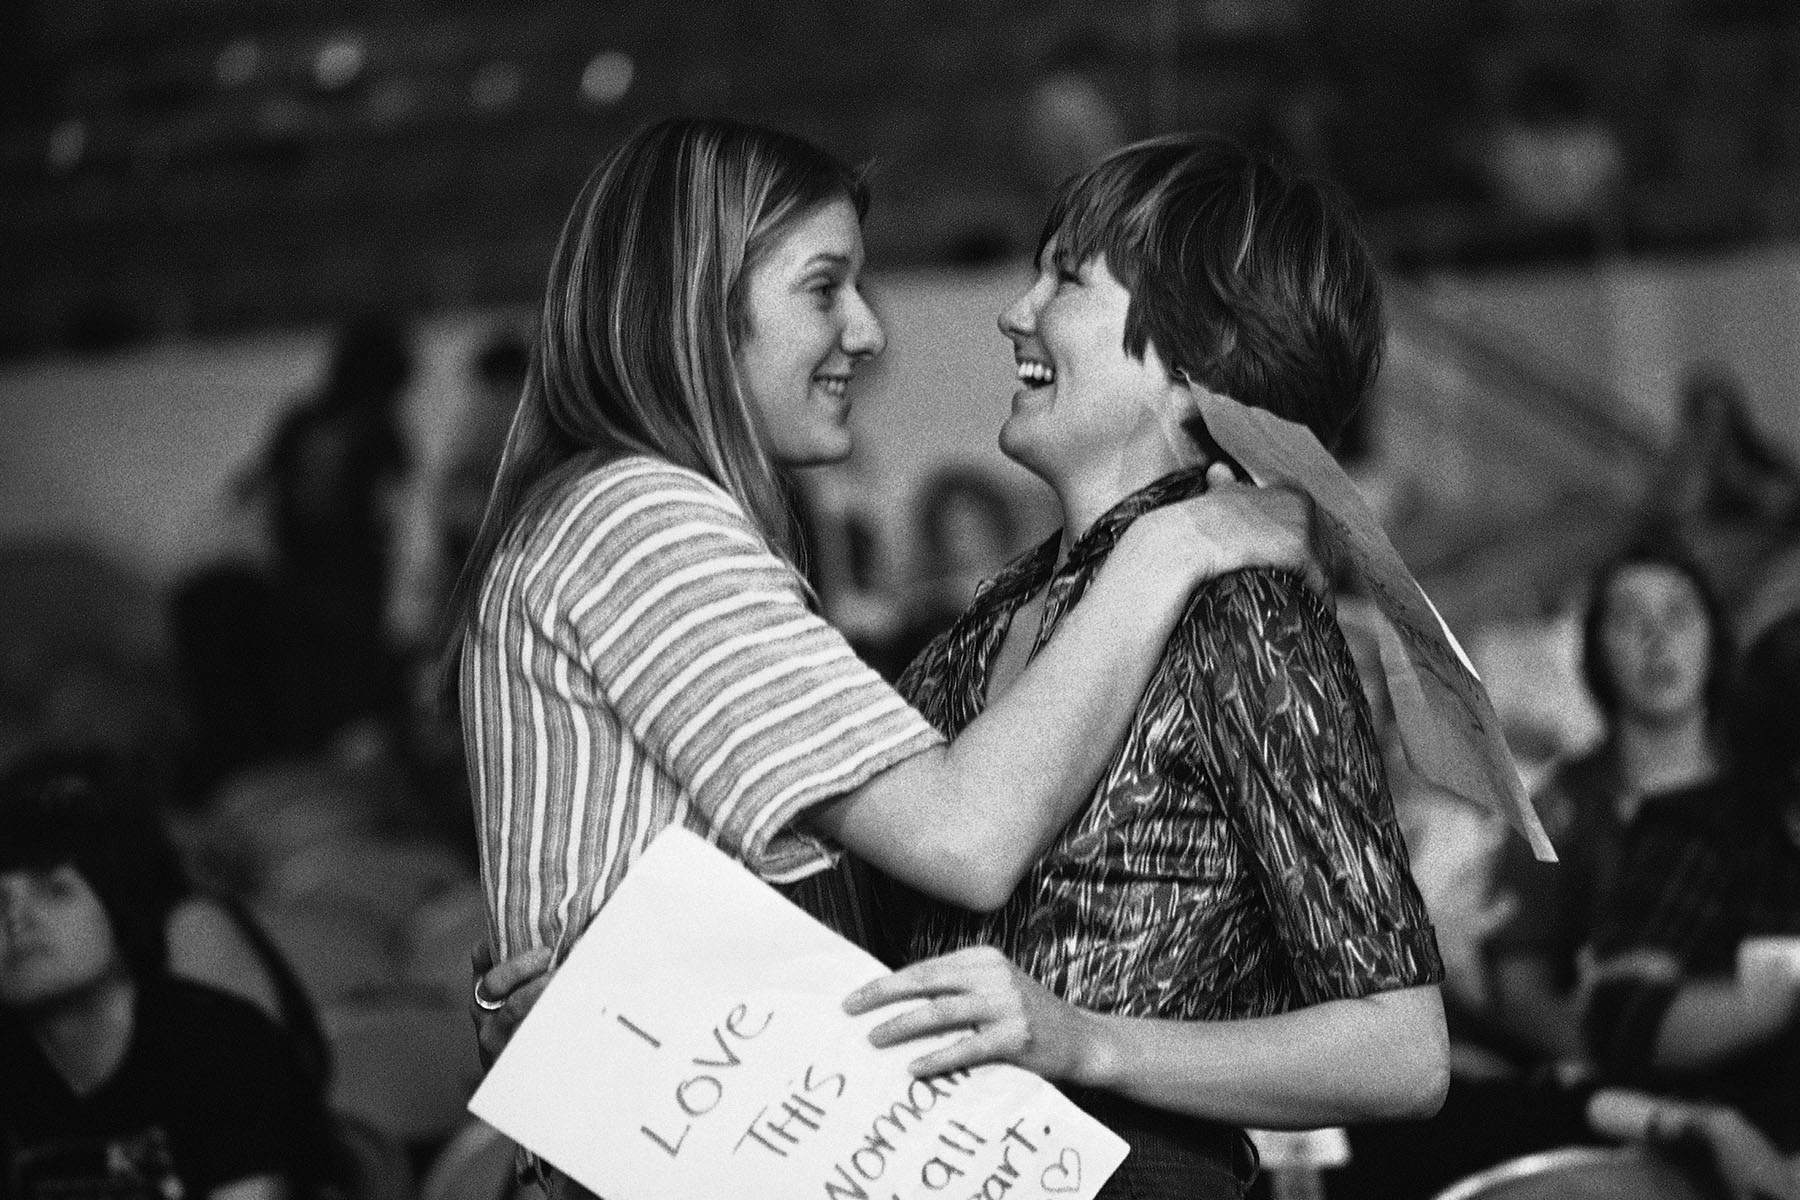 Two women hug each other as they celebrate the passing of the Sexual Preference Resolution. One holds a sign that reads "I Love This Woman."